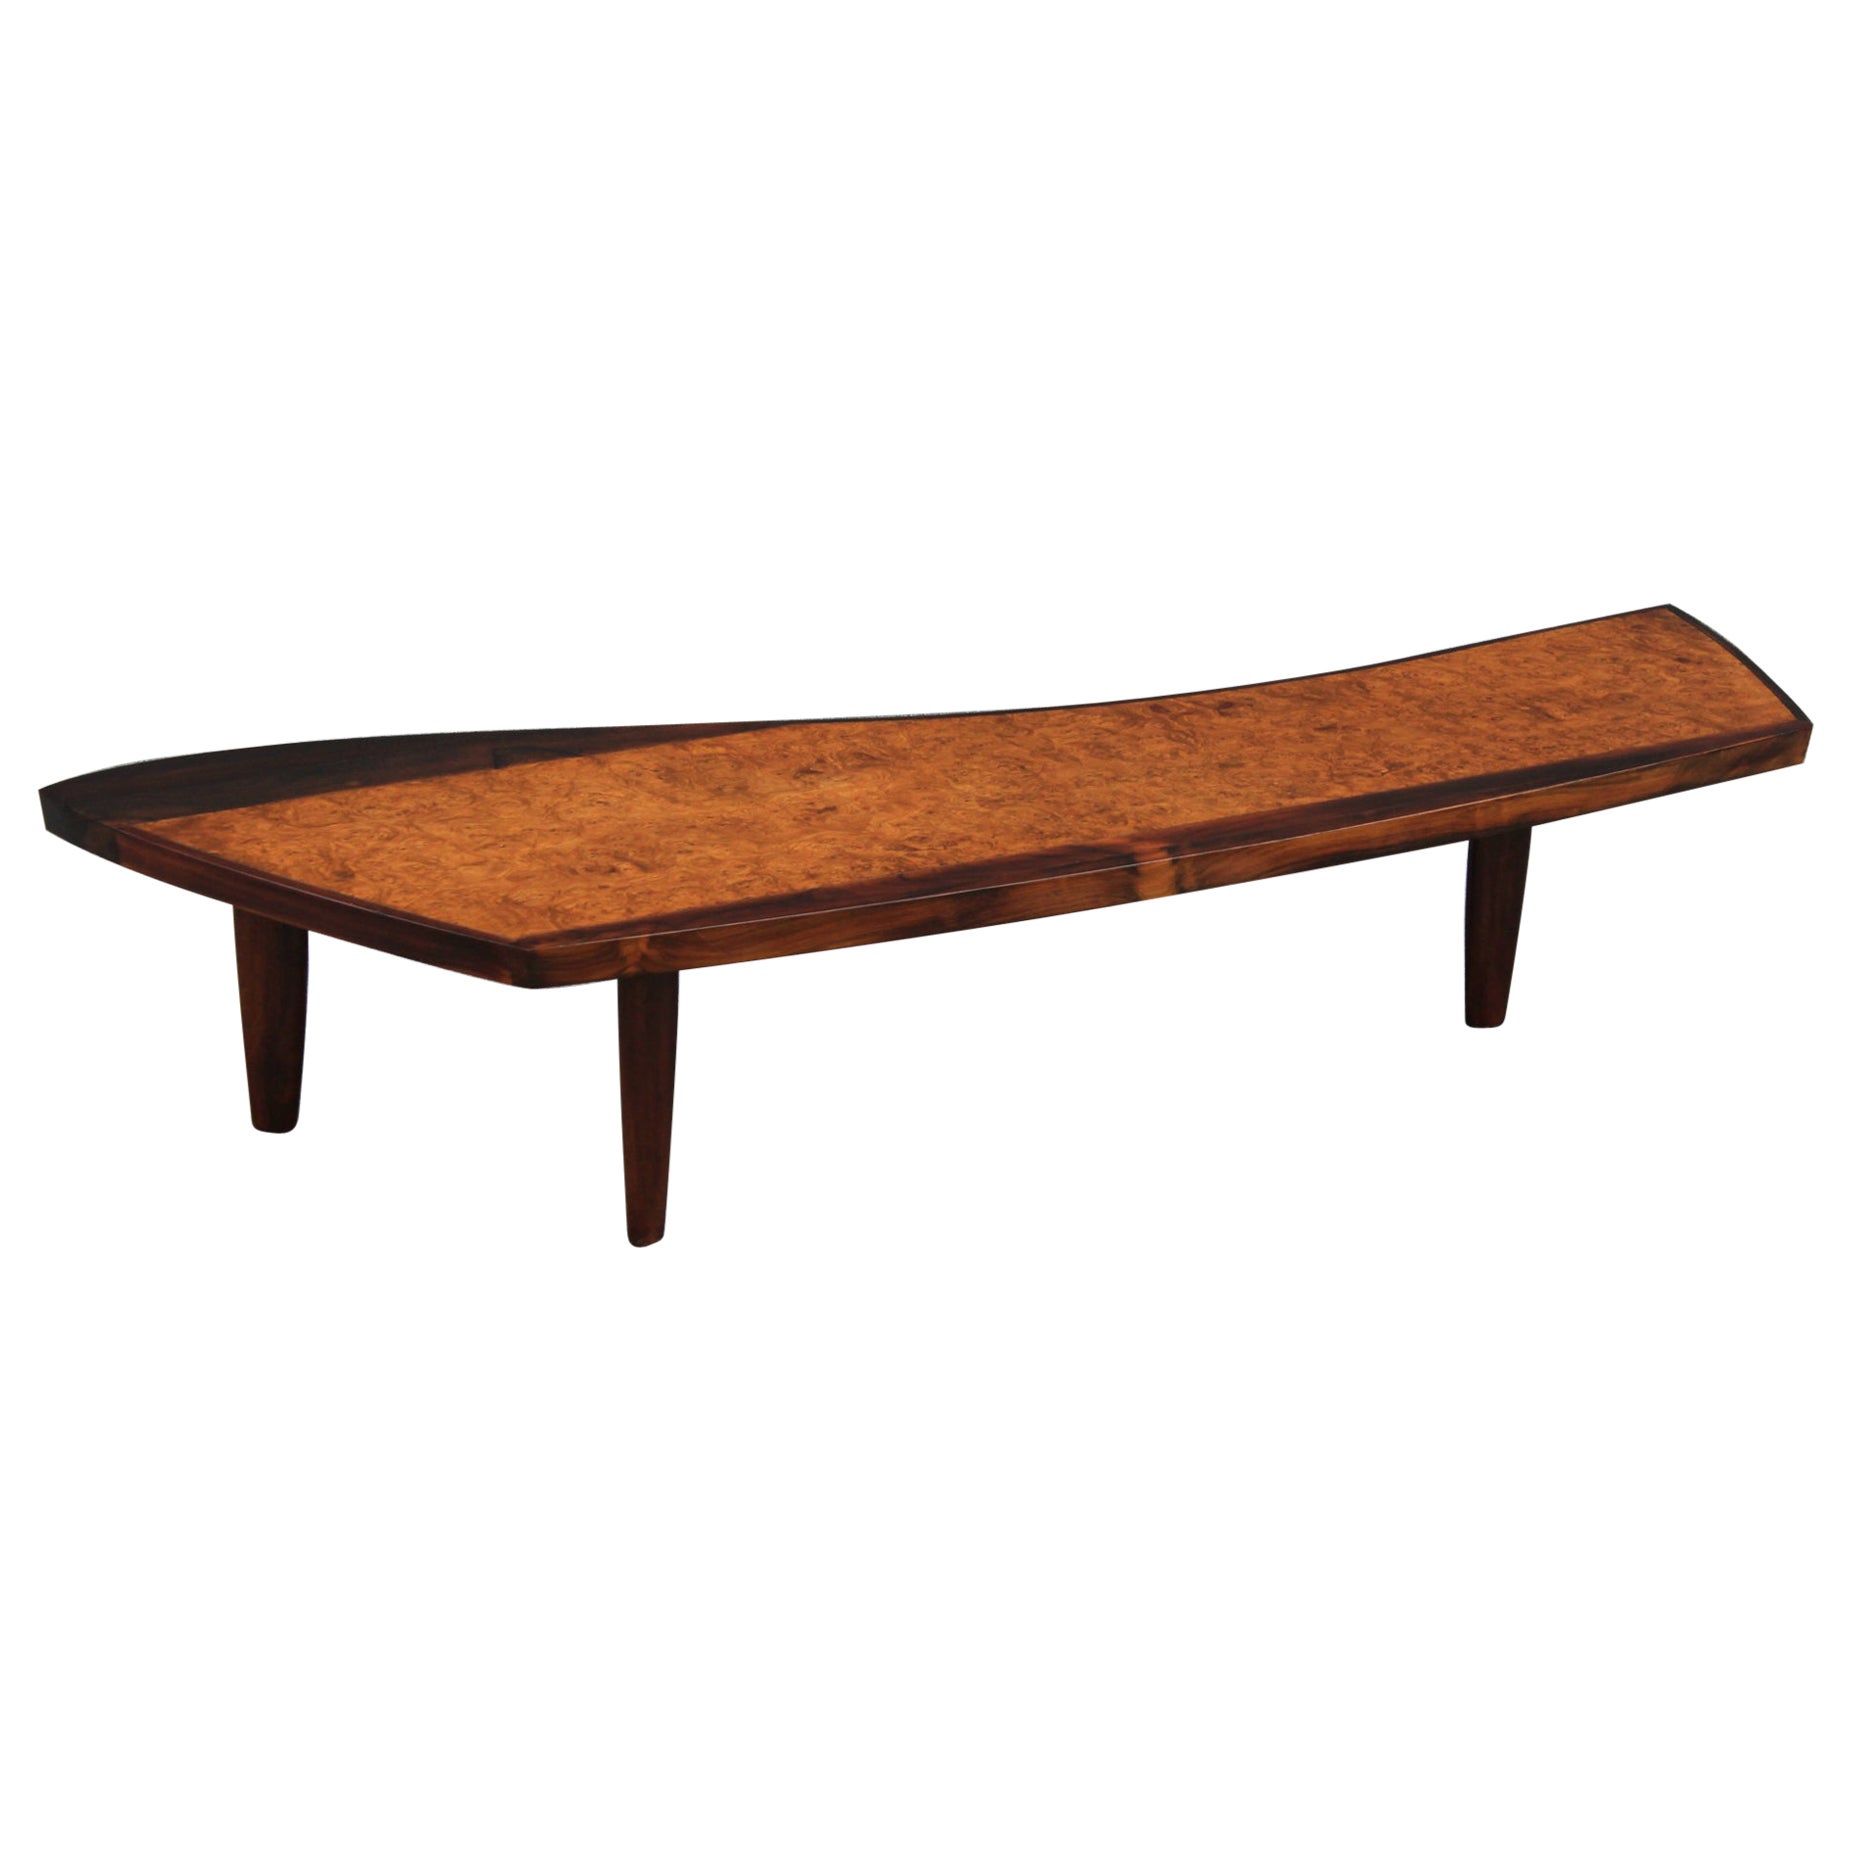 What is George Nakashima known for?